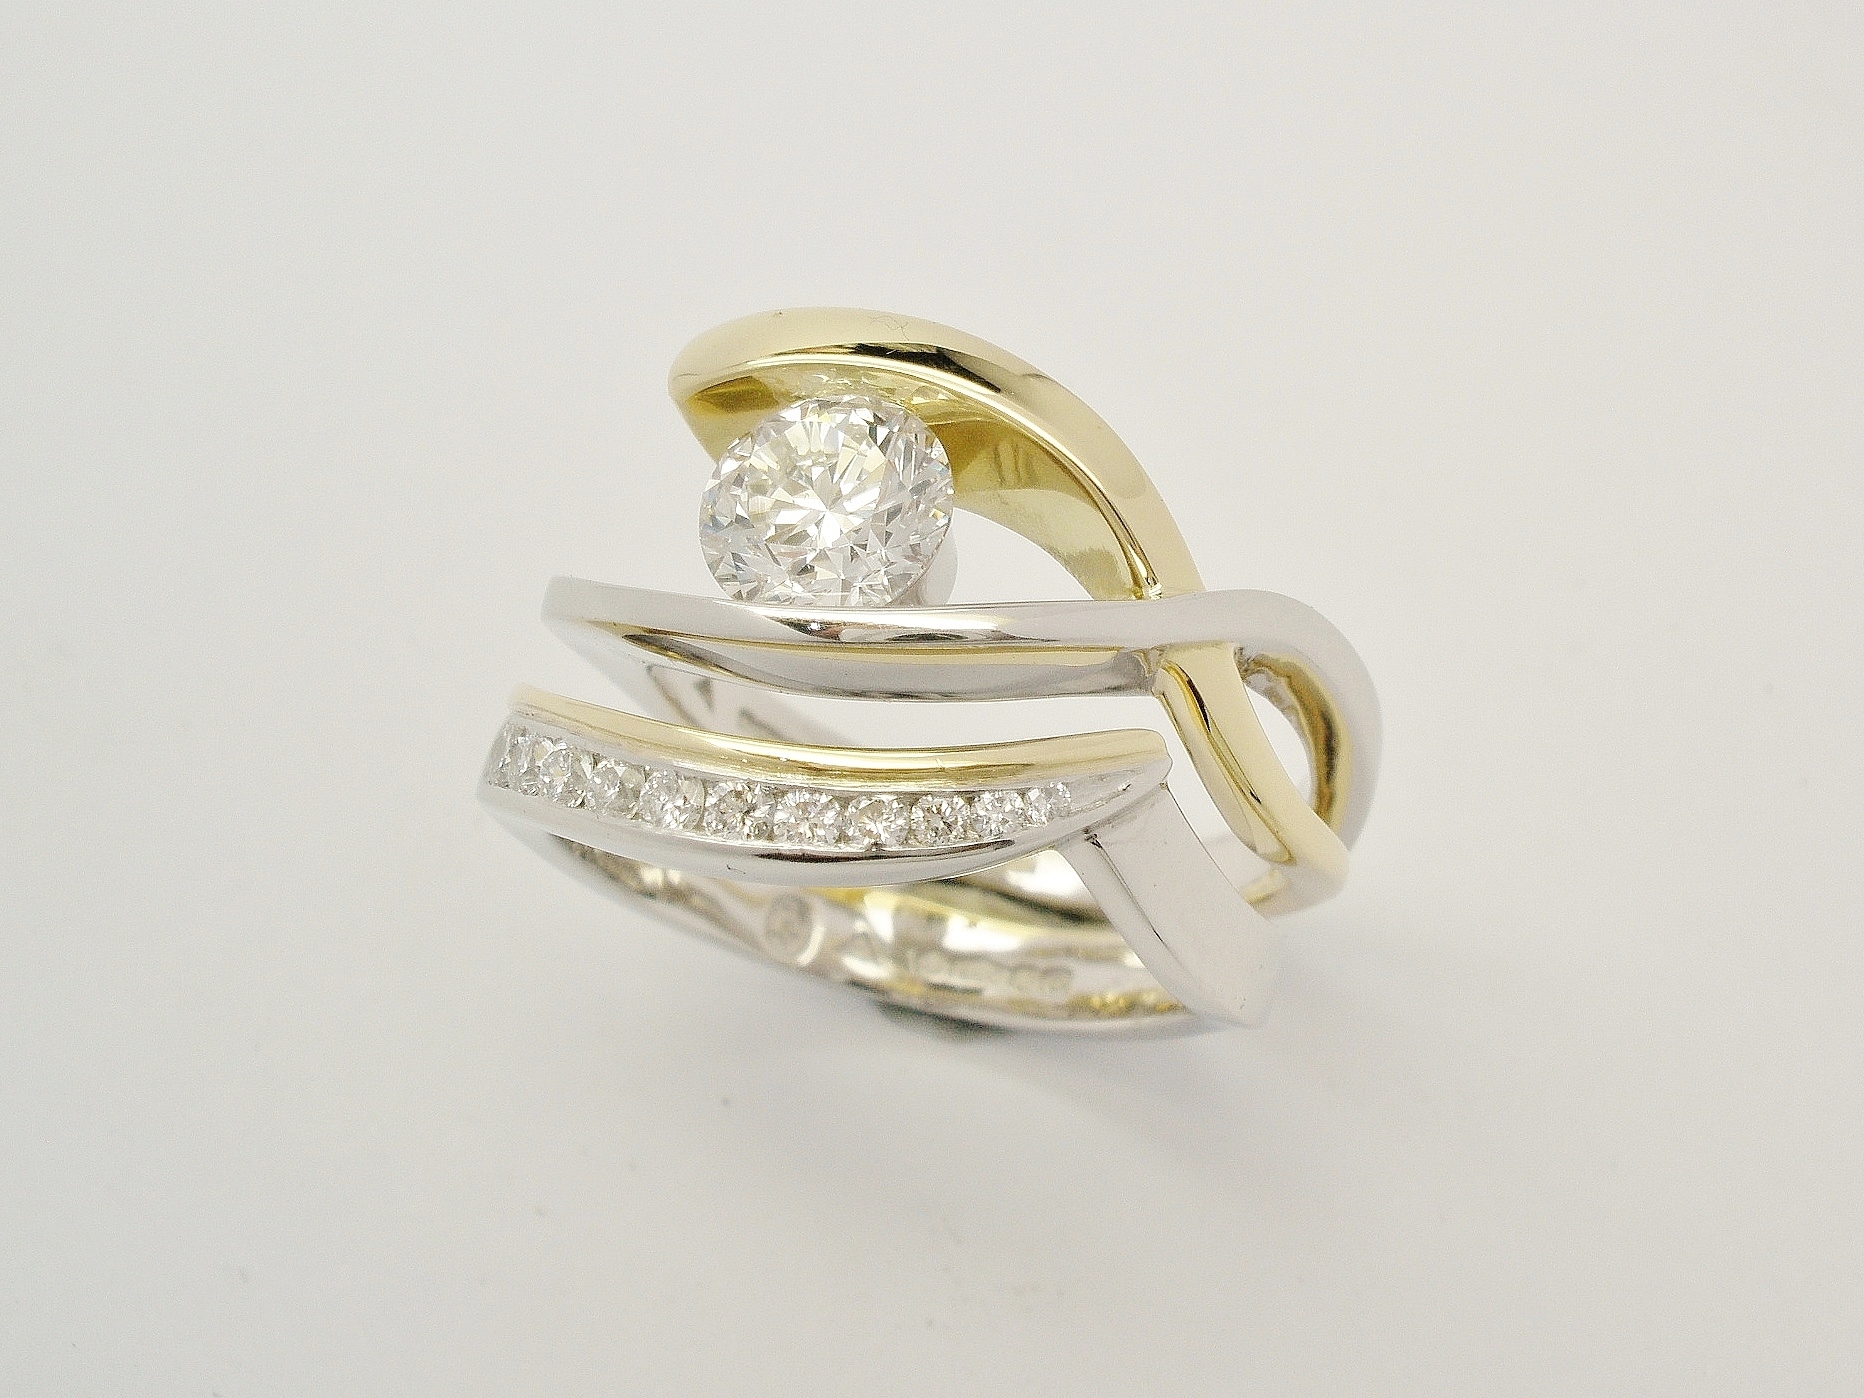 18ct. yellow gold & platinum wedding ring set with tapering sized diamonds around the curve shaped to fit single stone open cross-over engagement ring.